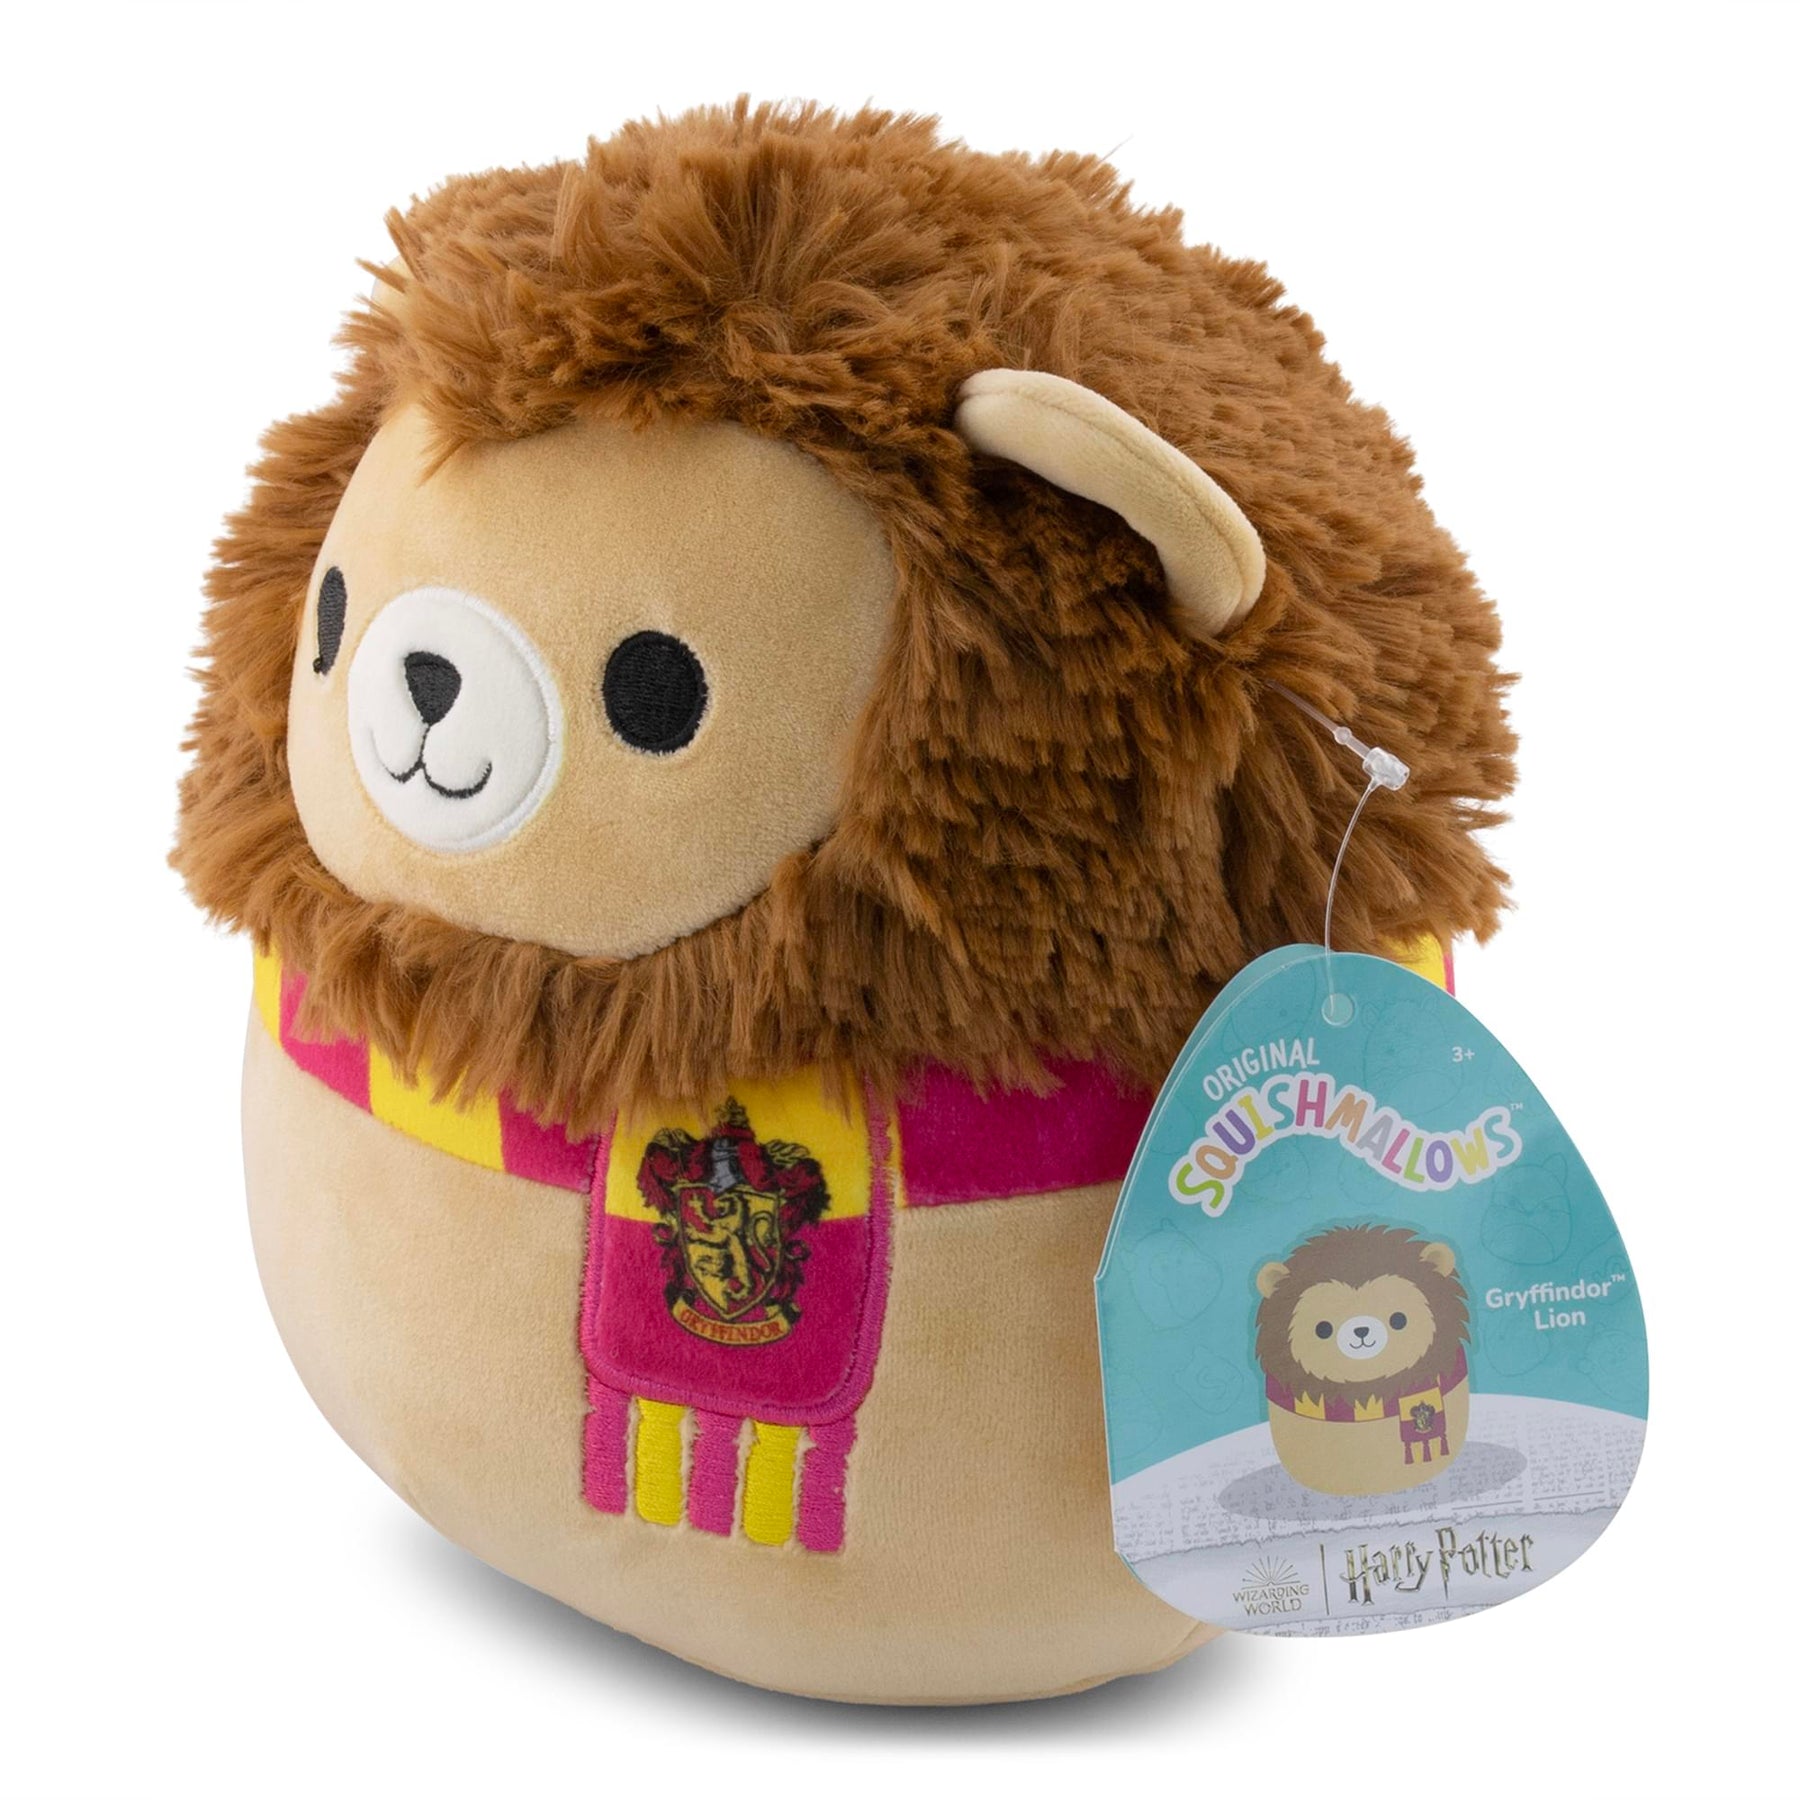 Boxlunch Squishmallows Harry Potter Gryffindor Lion 8 Inch Plush